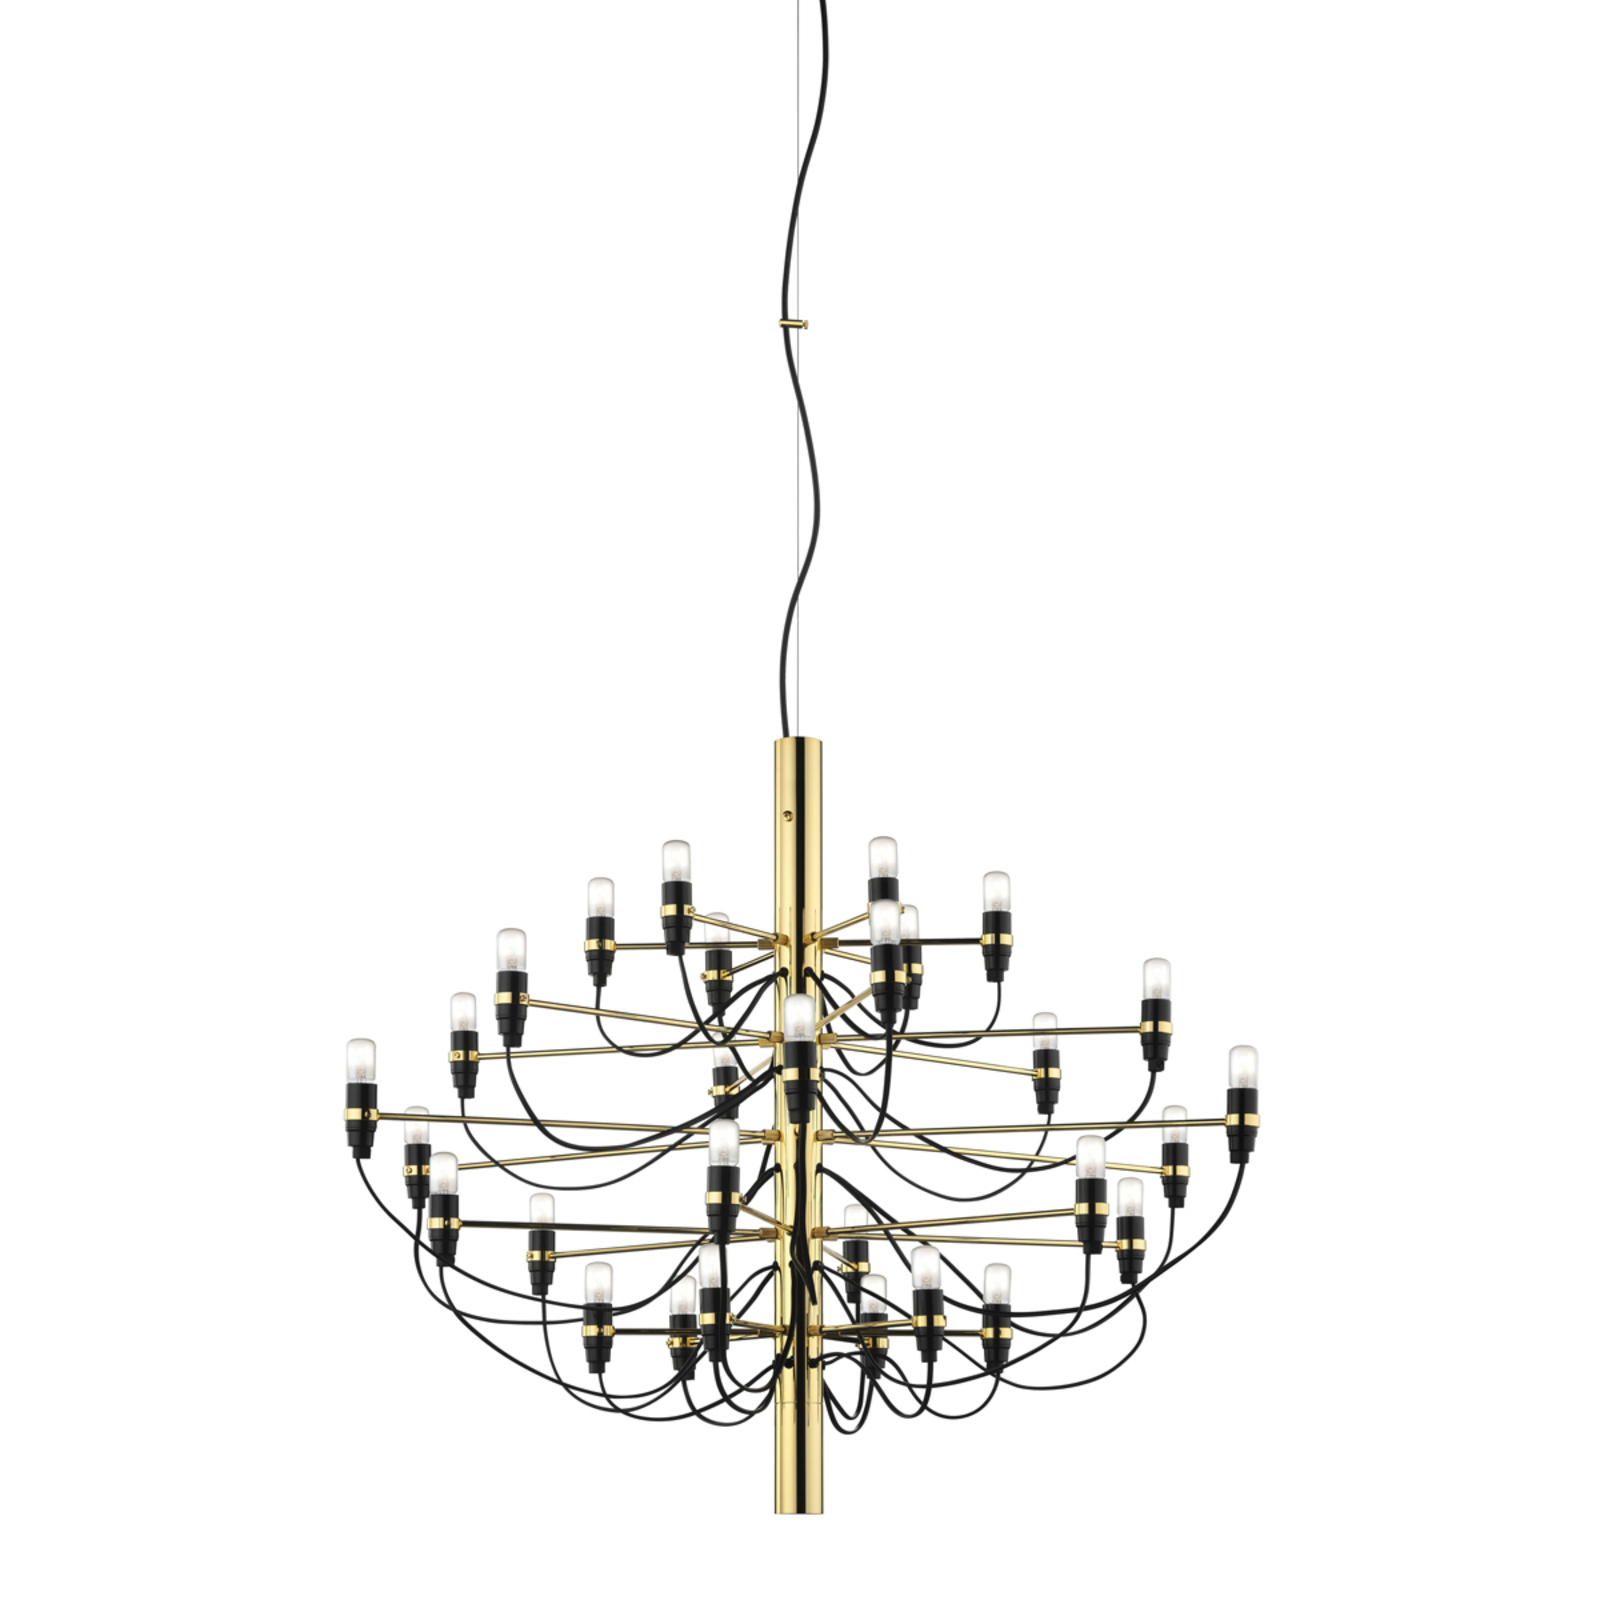 FLOS 2097/50 LED chandelier, frosted, brass